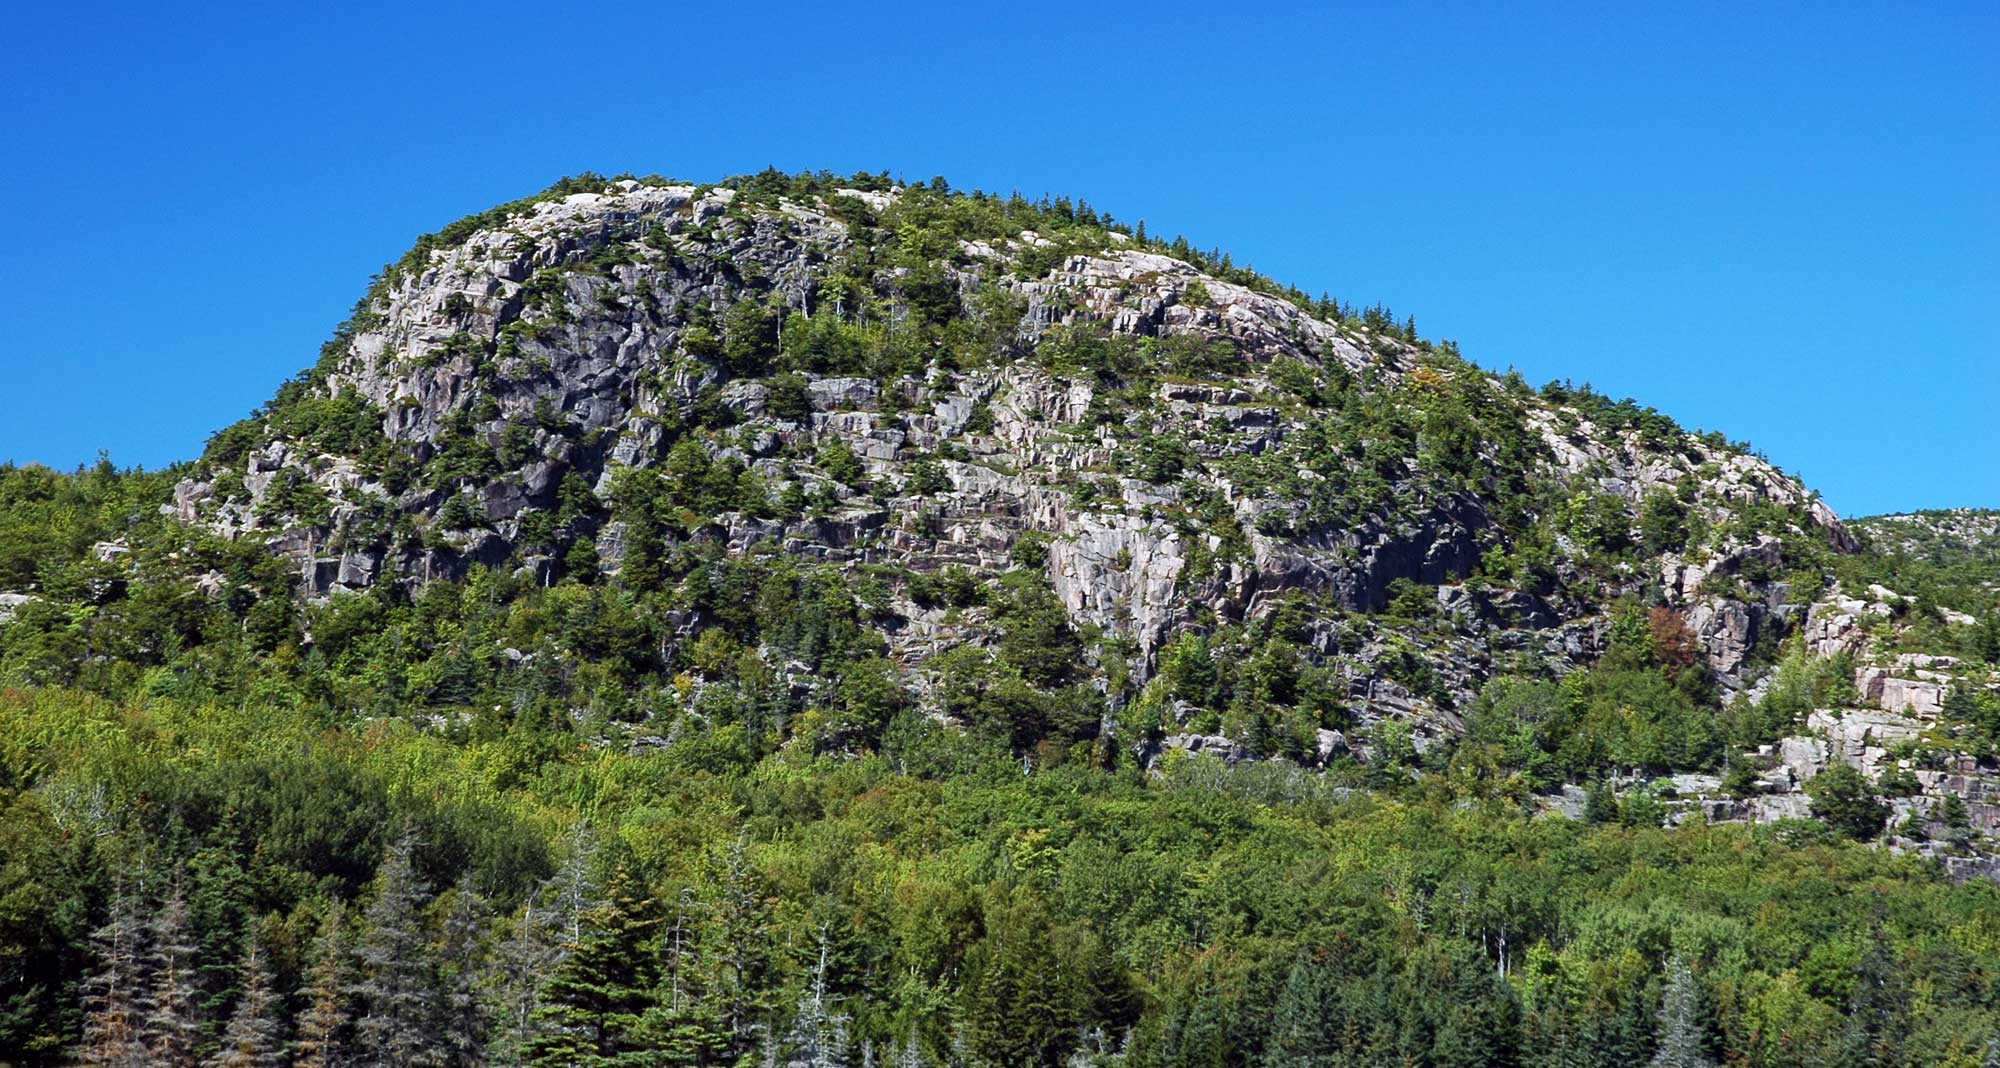 Photograph of "The Beehive," a rock formation at Acadia National Park, Main. The photo shows a rounded rock outcrop with a steep slope on the left and a gentler slope on the right. This outcrop was shaped by glacial action.